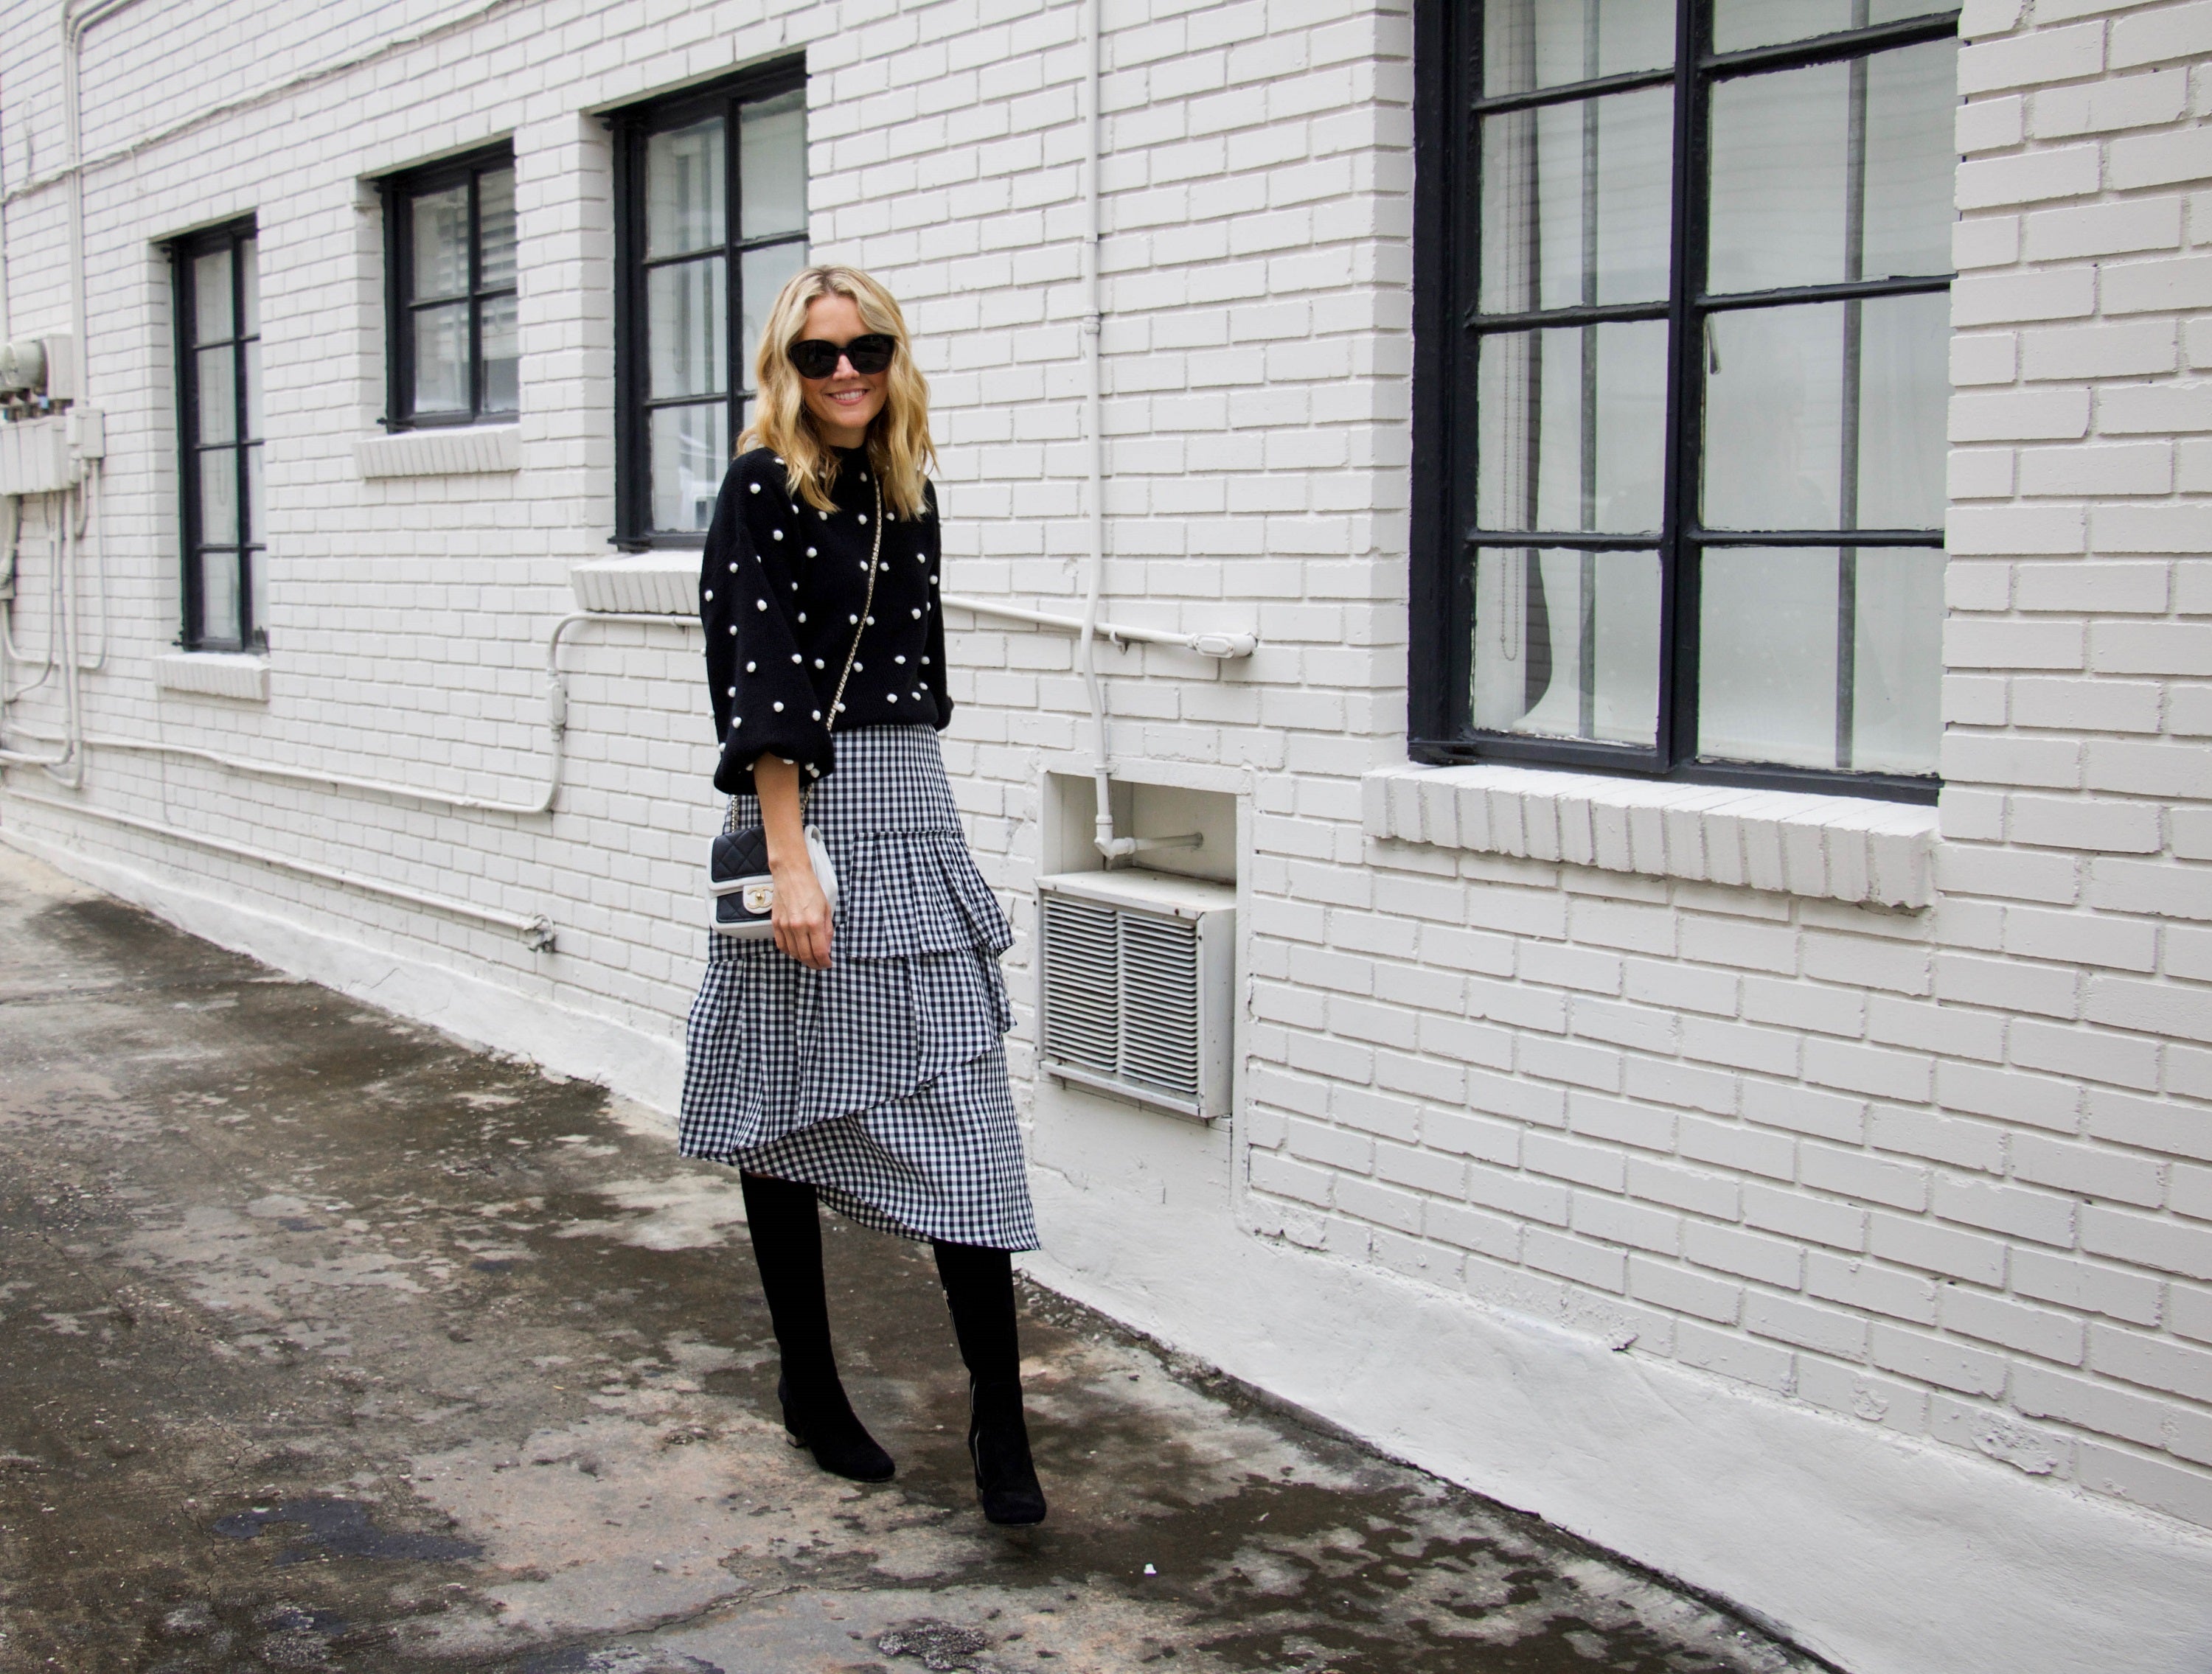 #12daysofsweaters - how to wear gingham year round